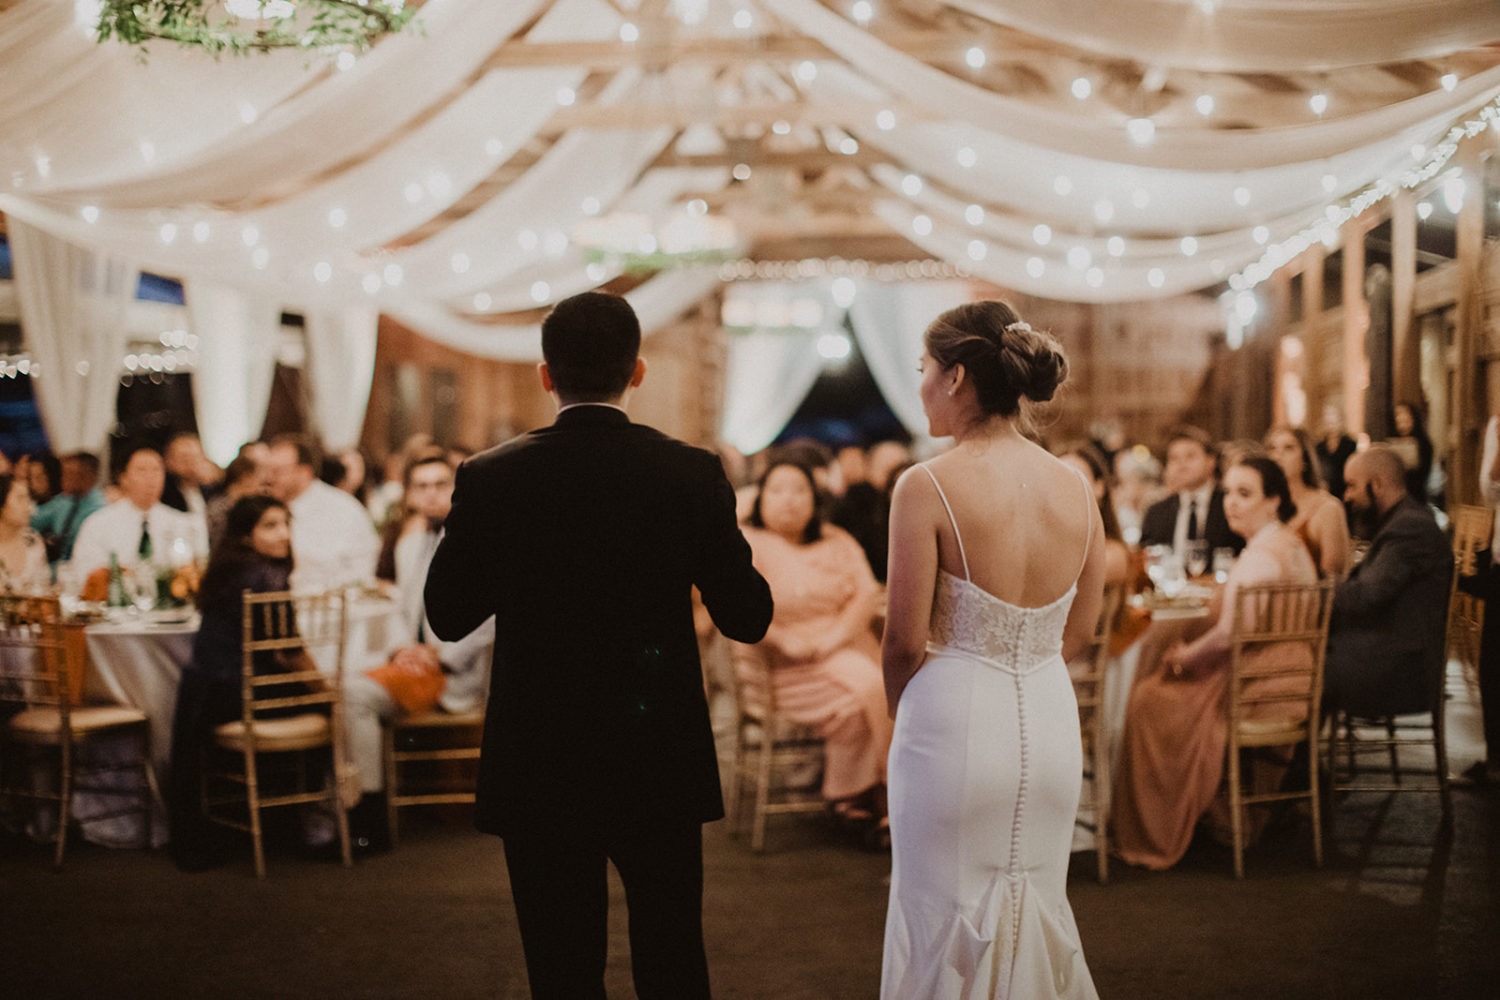 Couple speaks to guests at wedding reception